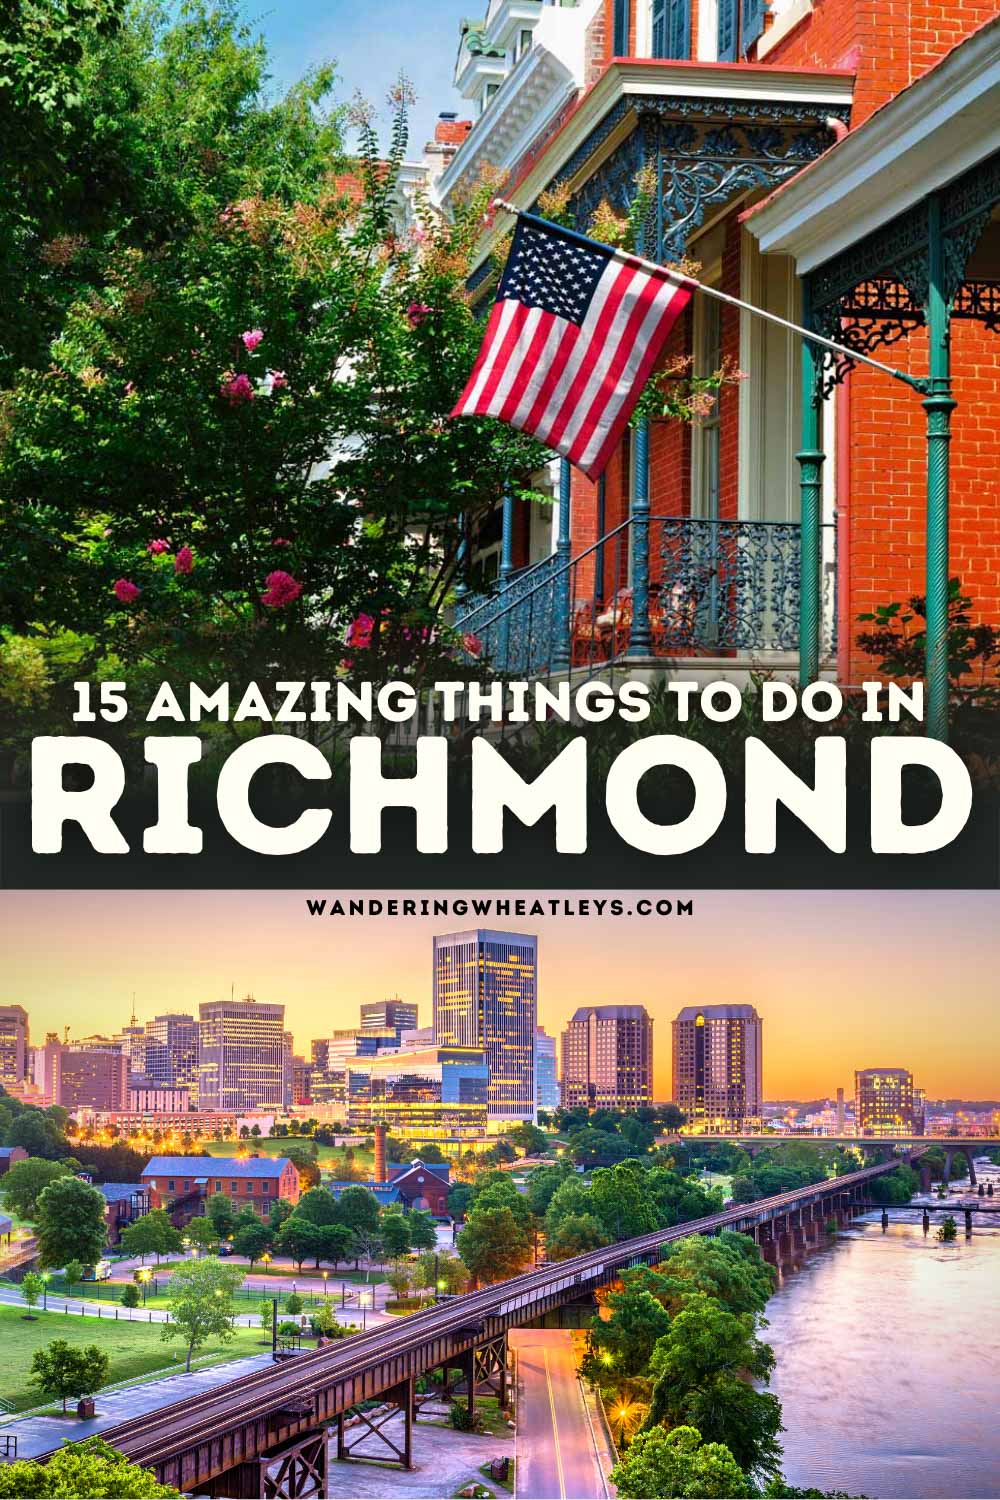 The Best Things to do in Richmond, VA